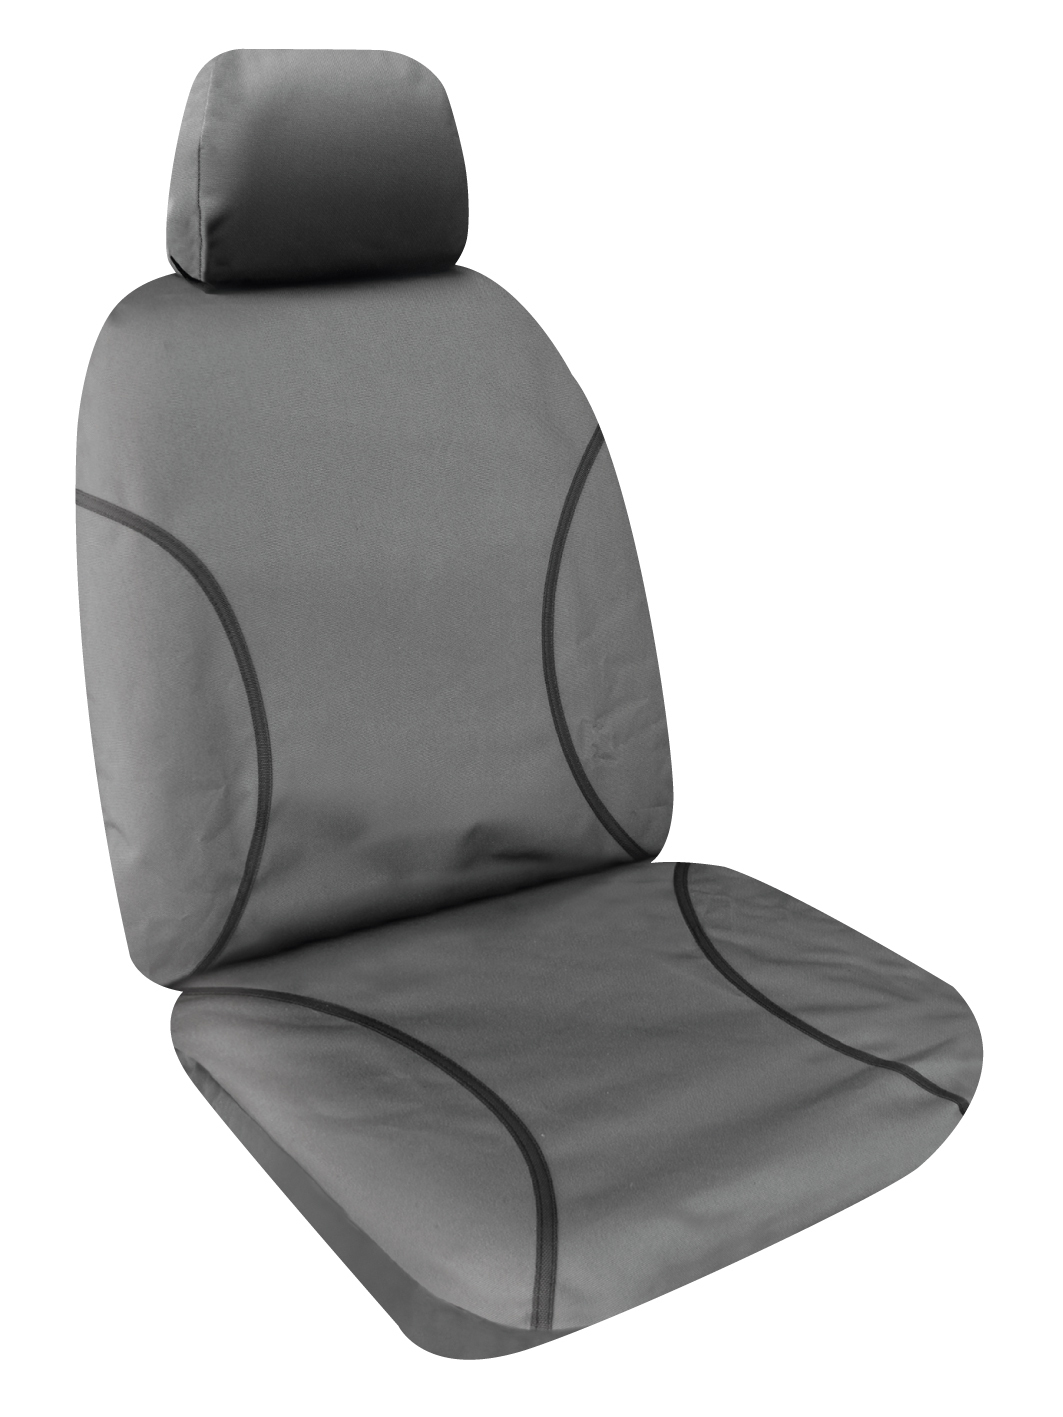 SPERLING MIDDLE ROW SEAT COVERS TO SUIT TOYOTA LANDCRUISER (200 SERIES) GXL, 8 SEATER, 2007 - CURRENT